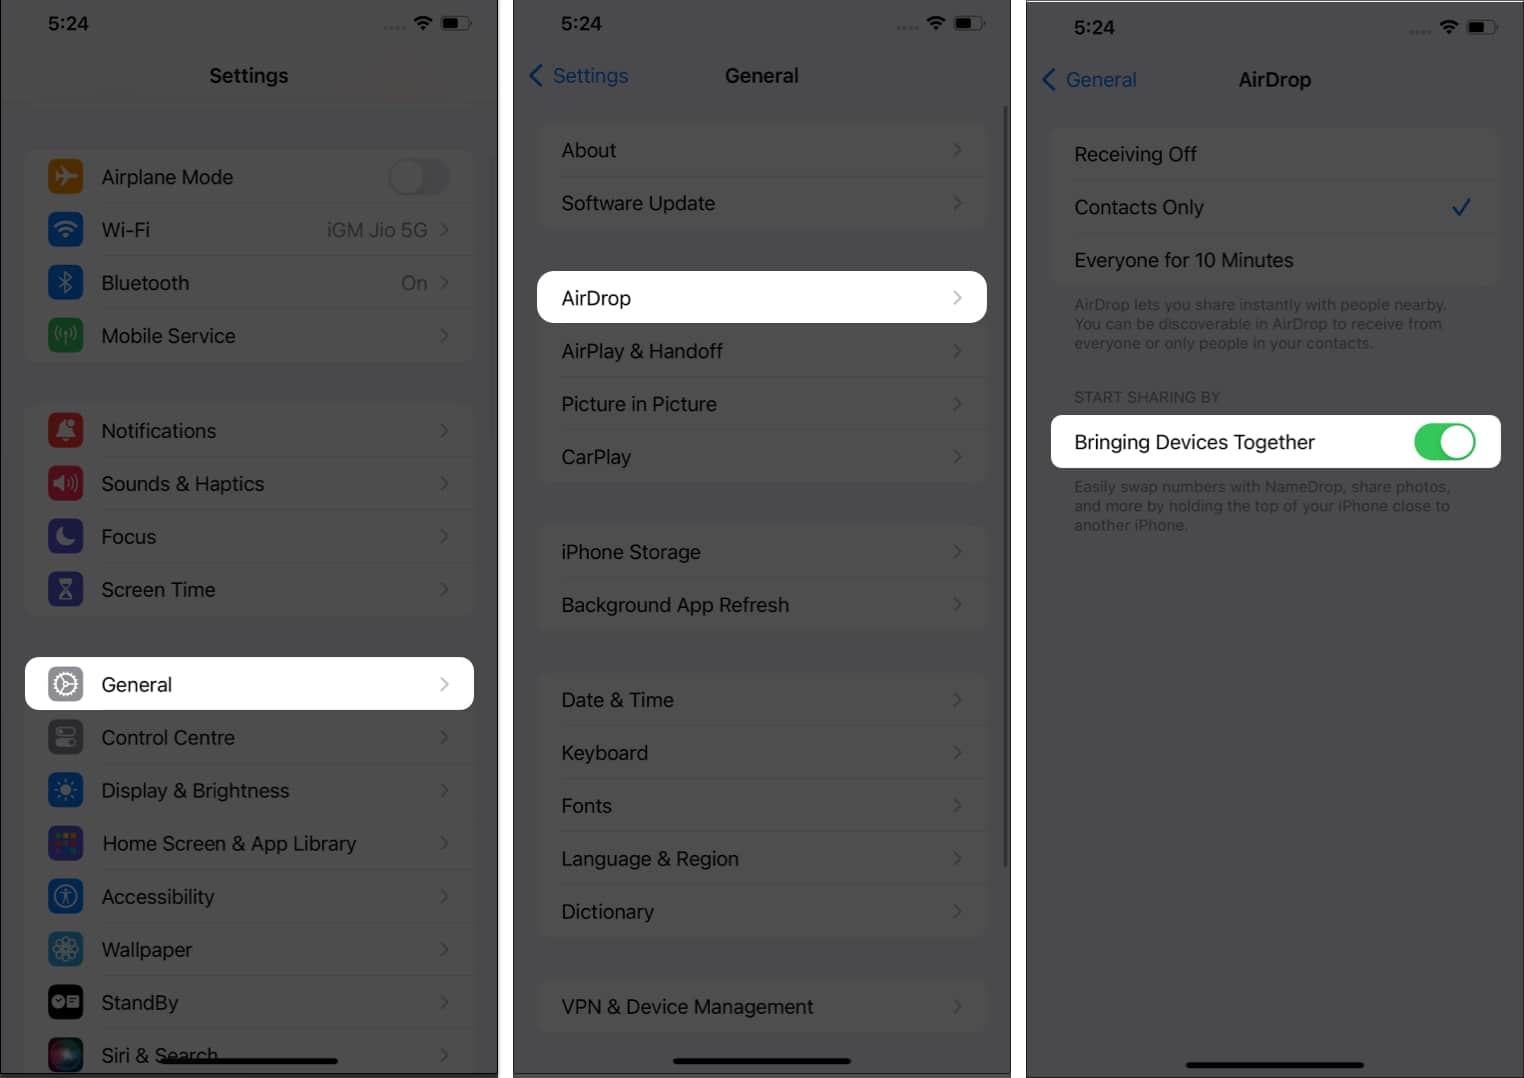 General, AirDrop, Toggle on Bring devices Together